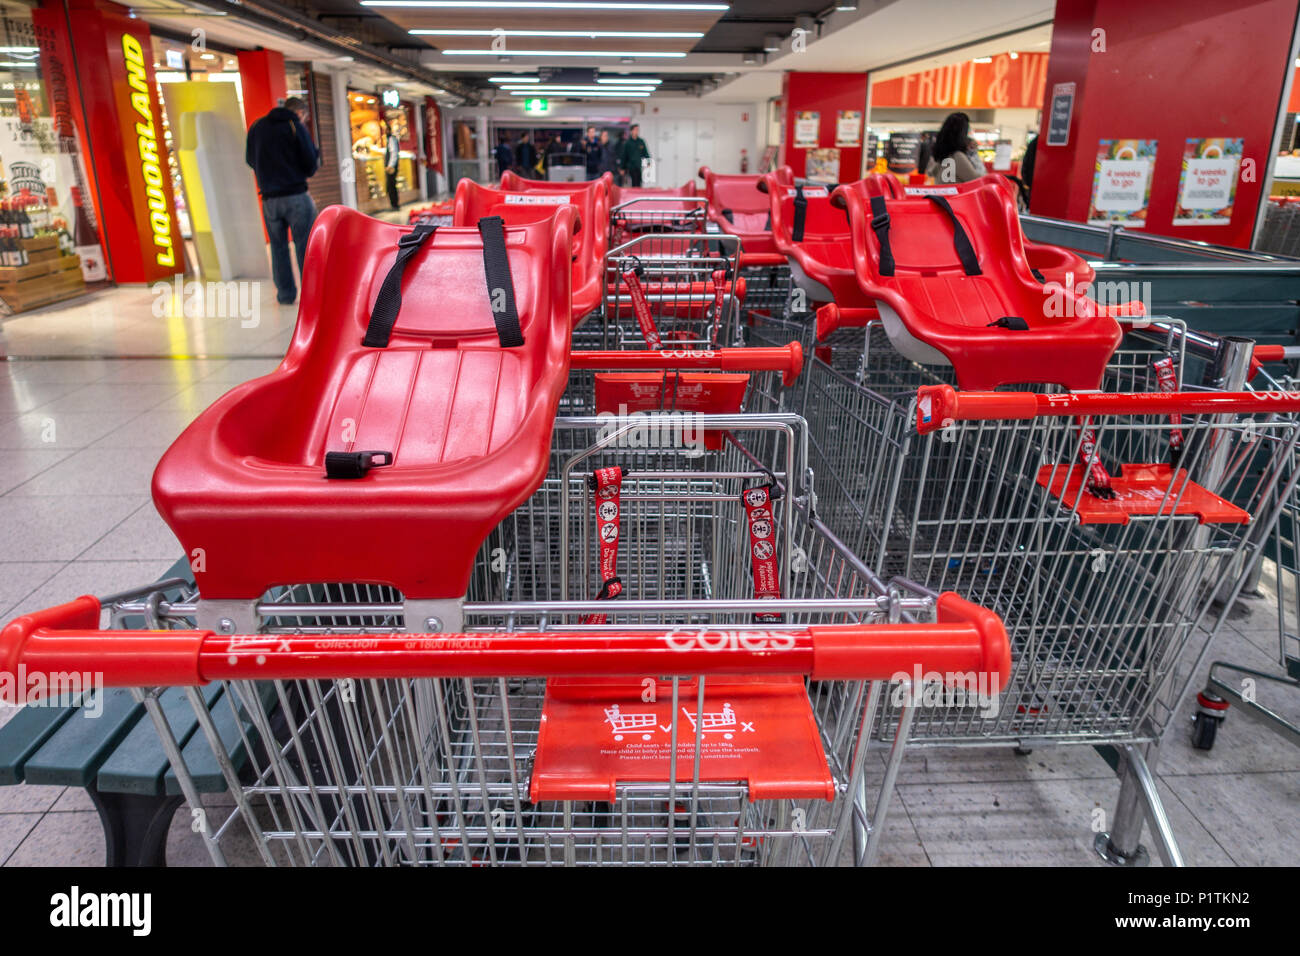 The shopping trolleys with plastic child seats outside Coles Supermarket. Melbourne, VIC Australia. Stock Photo